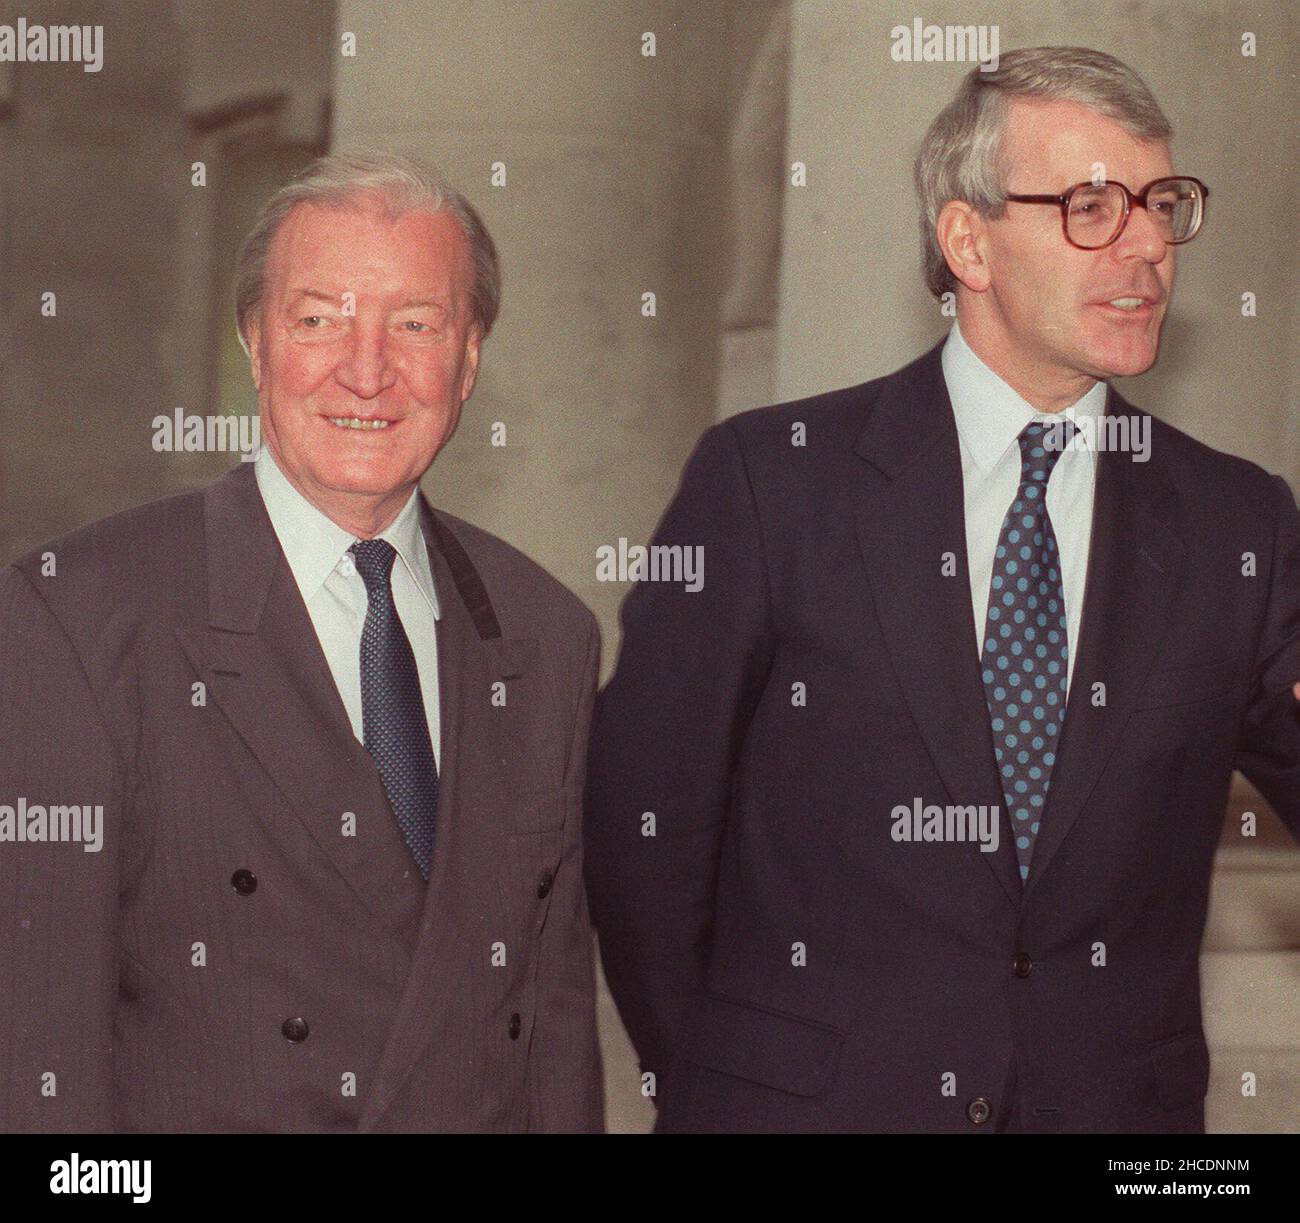 File photo dated 04/12/91 of the then Irish Prime Minister Charles Haughey (left) with the then British Prime Minister John Major during a visit to Dublin for talks. Mr Haughey told Mr Major at a meeting in 1991 that he should not 'attribute too much sophistication to the unionists' amid ongoing efforts to bring The Troubles to a close, according to newly released documents from the National Archives. Issue date: Tuesday December 28, 2021. Stock Photo